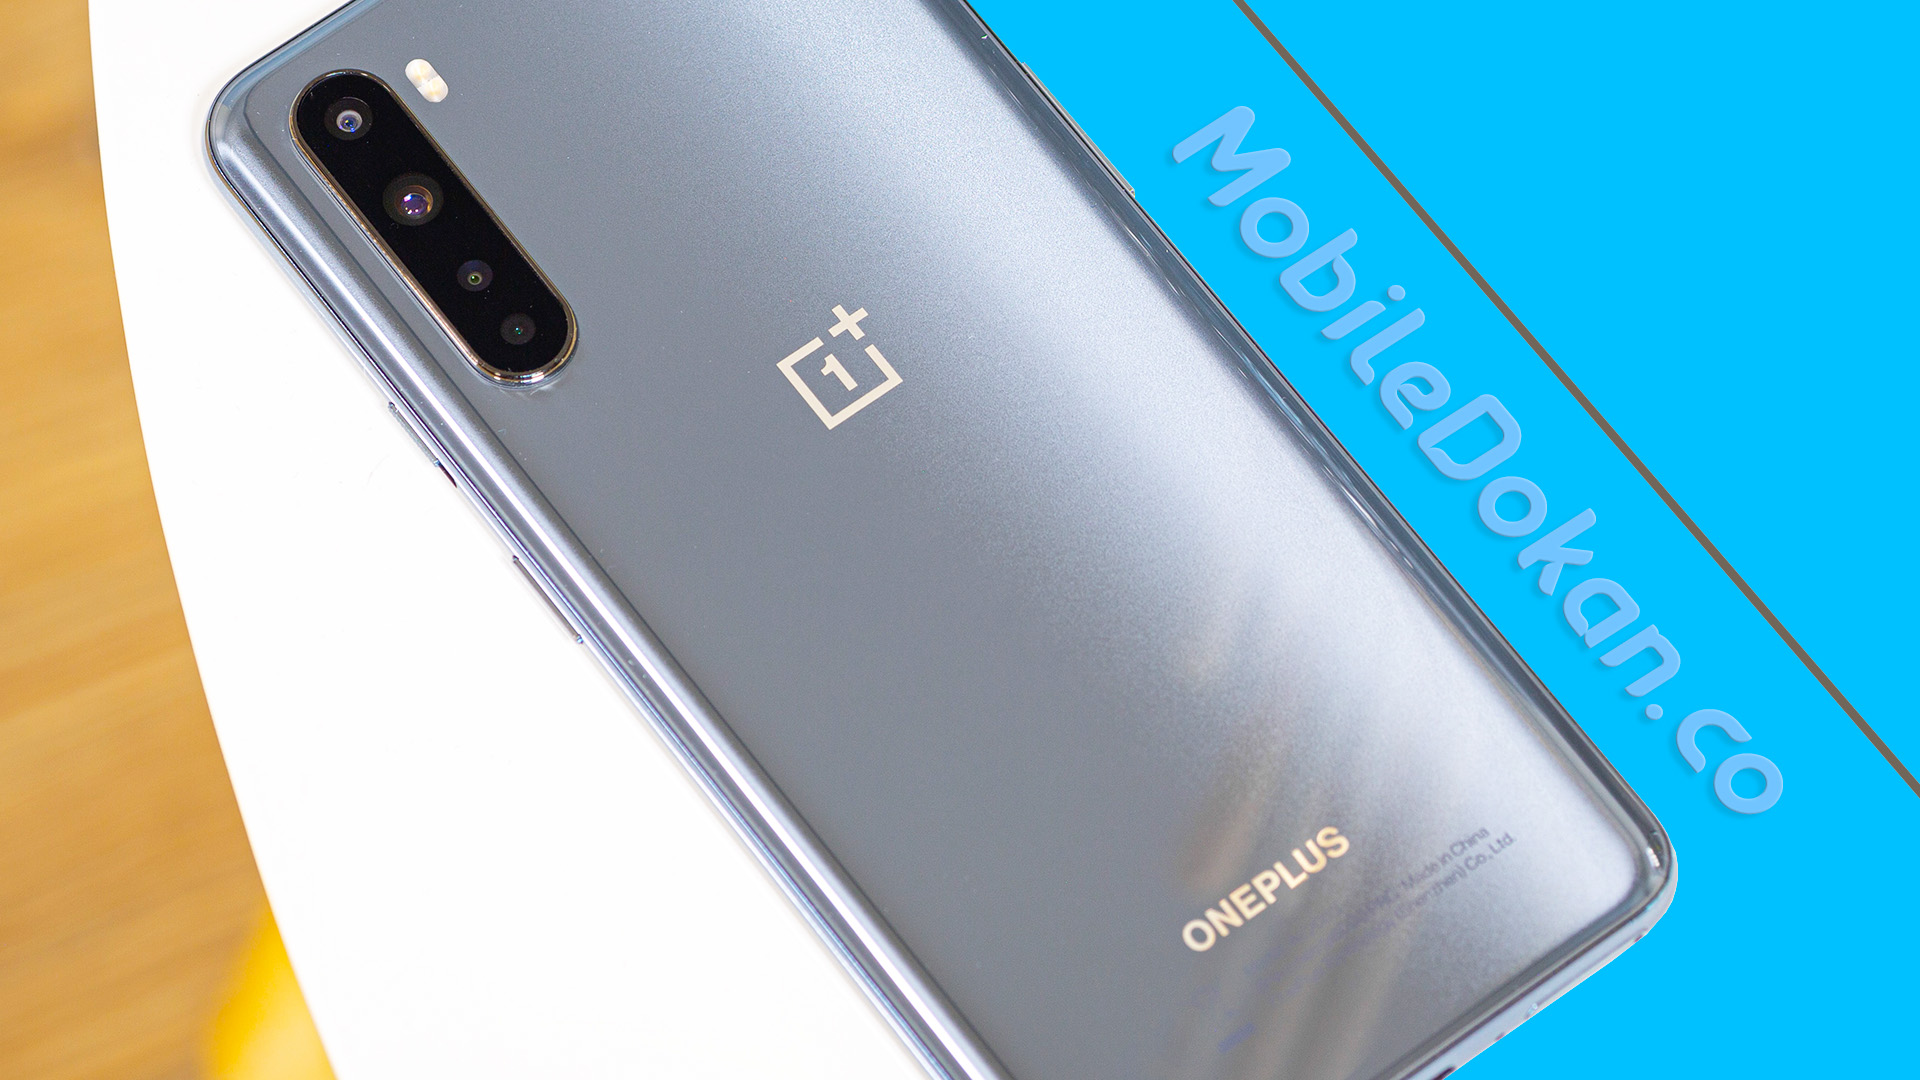 OnePlus is working on an entry-level phone